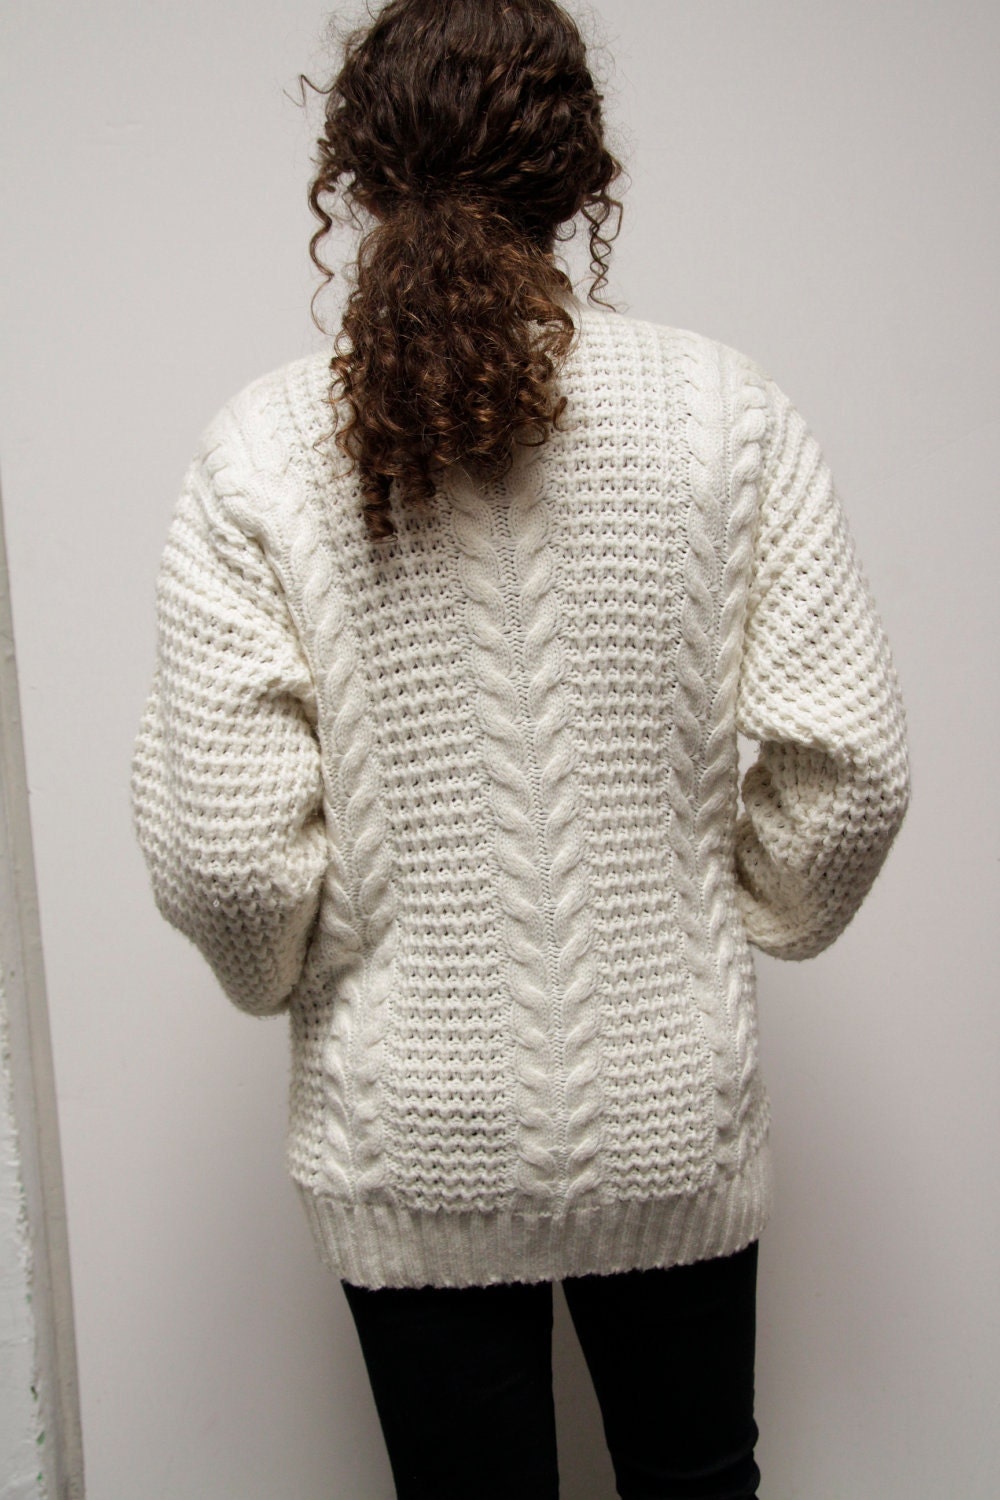 women's CARDIGAN sweater CREAM long THICK knit cable warm